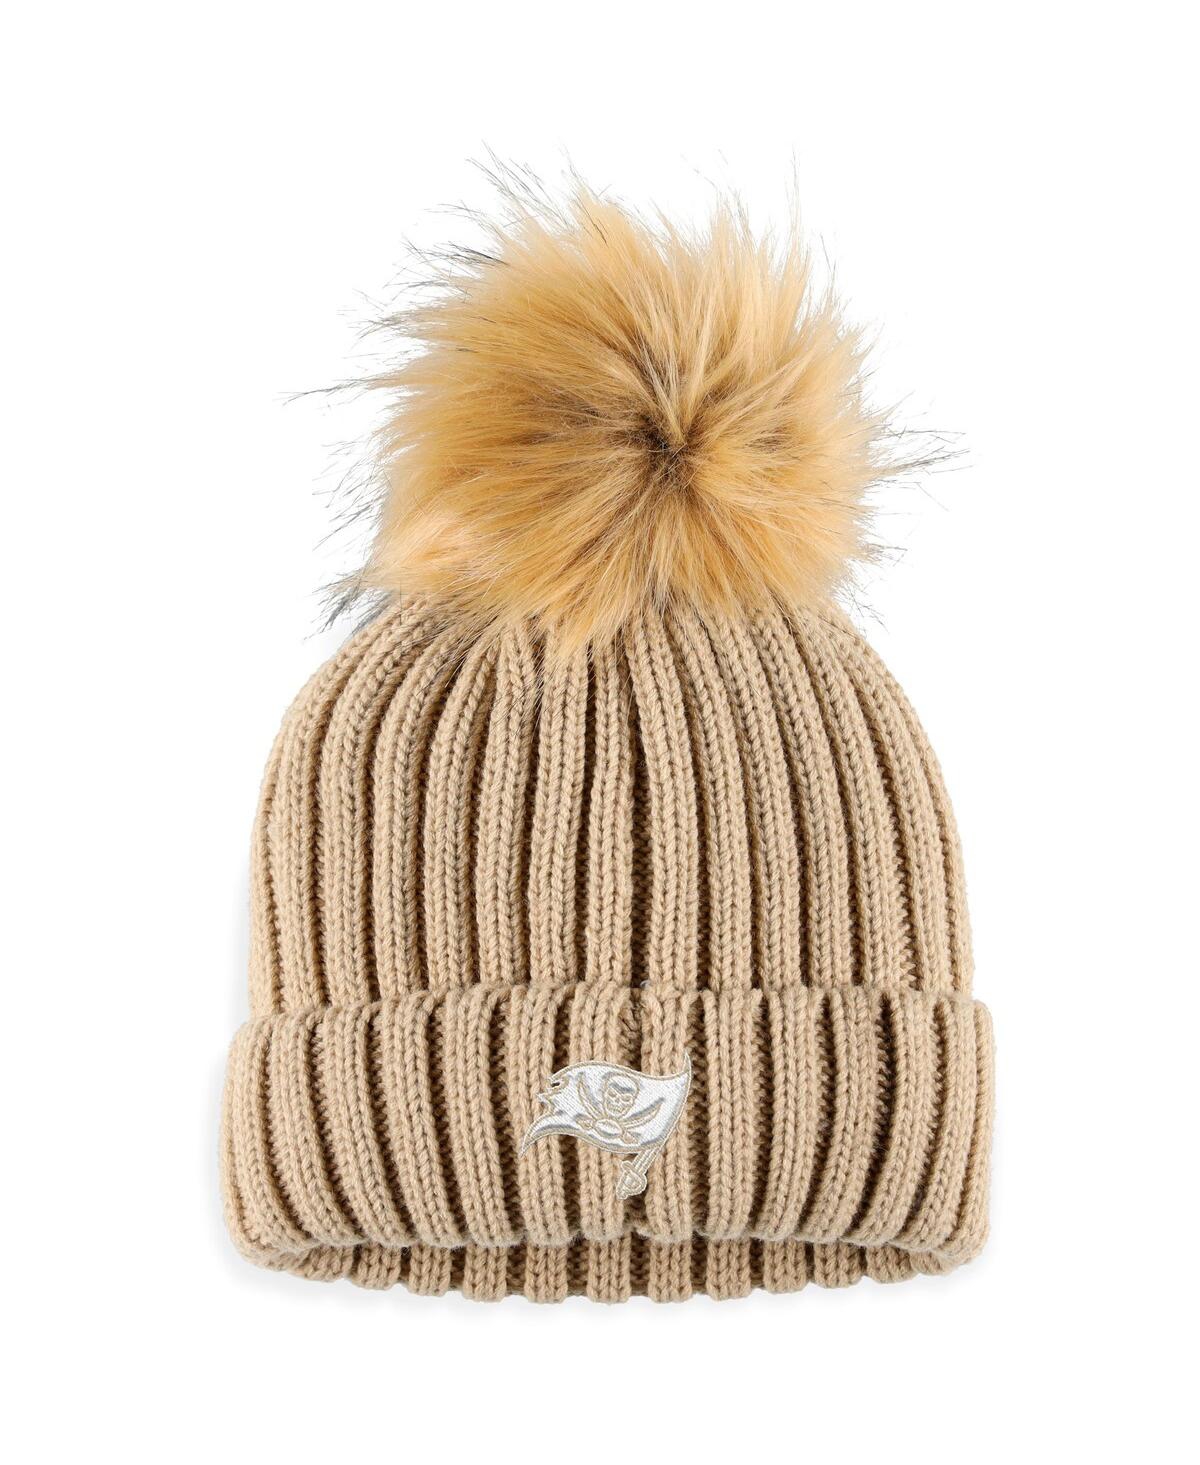 Wear By Erin Andrews Women's  Tan Tampa Bay Buccaneers Neutral Cuffed Knit Hat With Pom